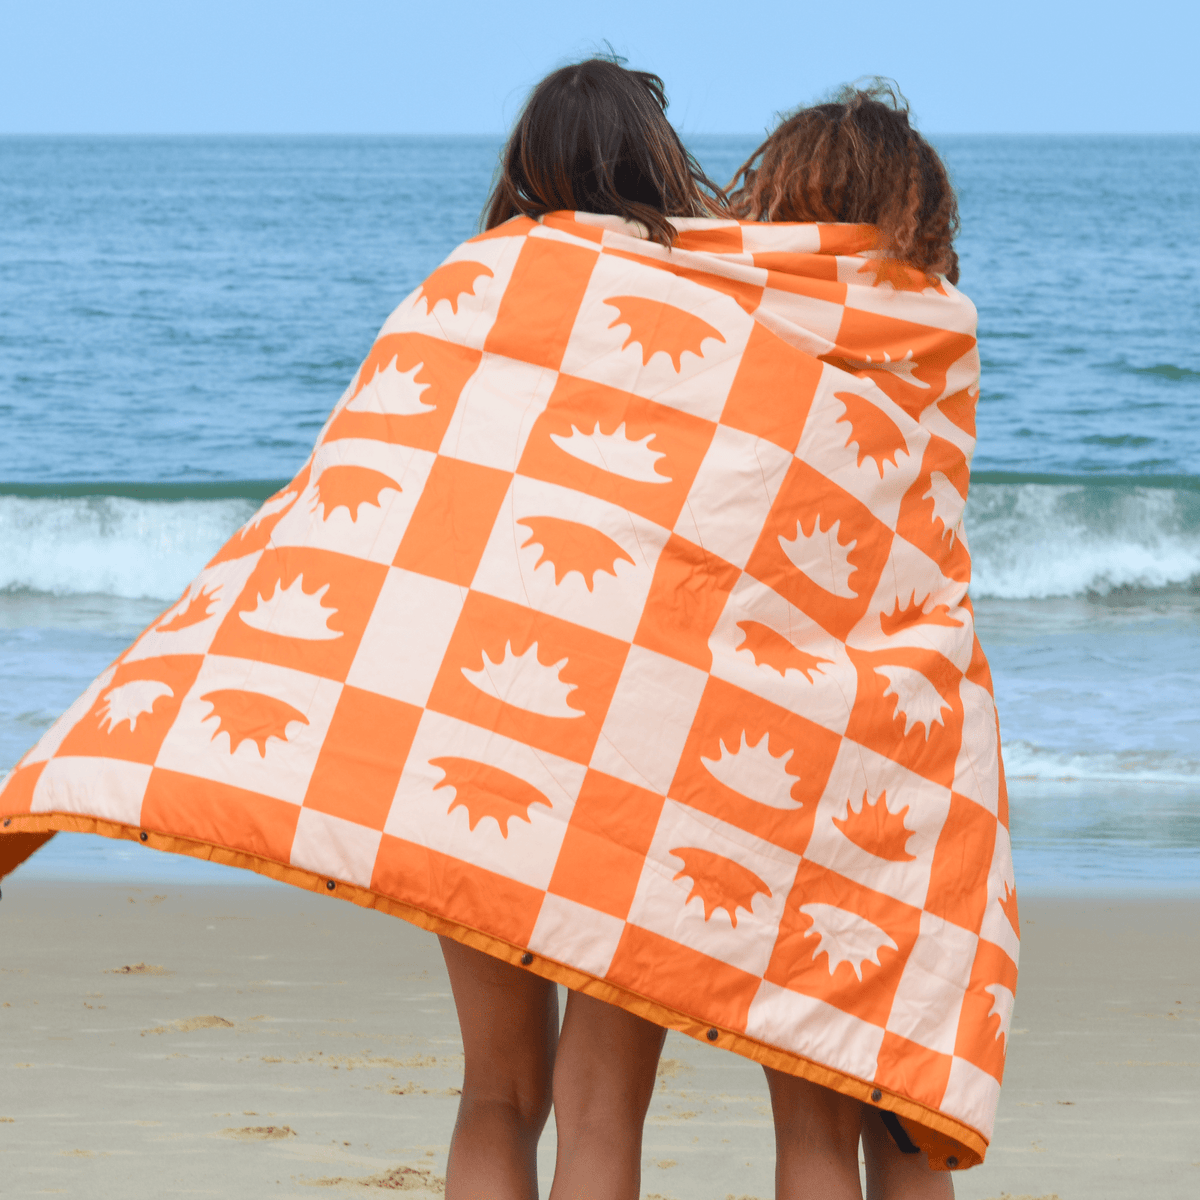 VOITED Compact Picnic & Beach Blanket - Concha